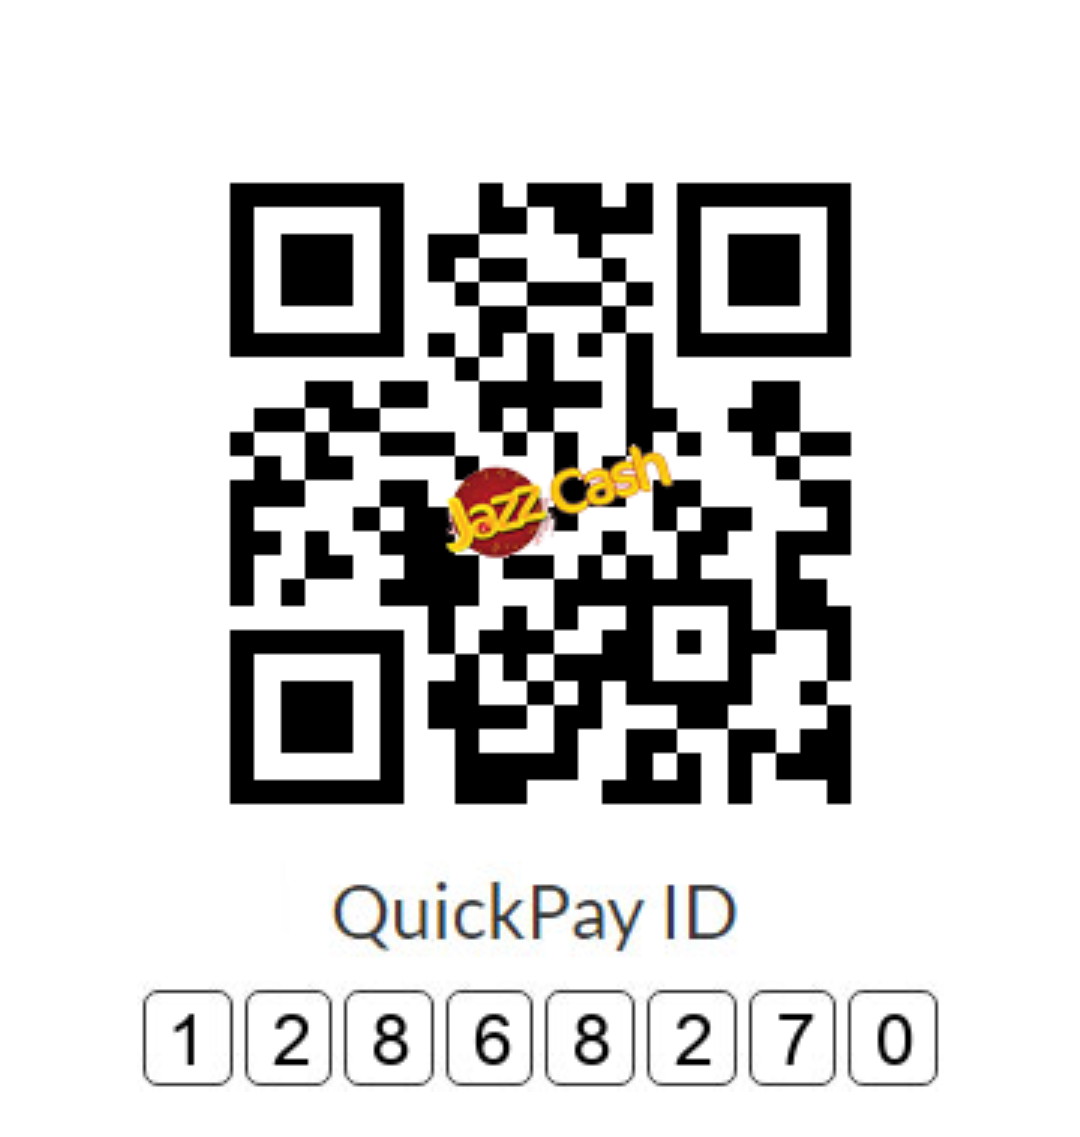 JUST SCAN AND BUY